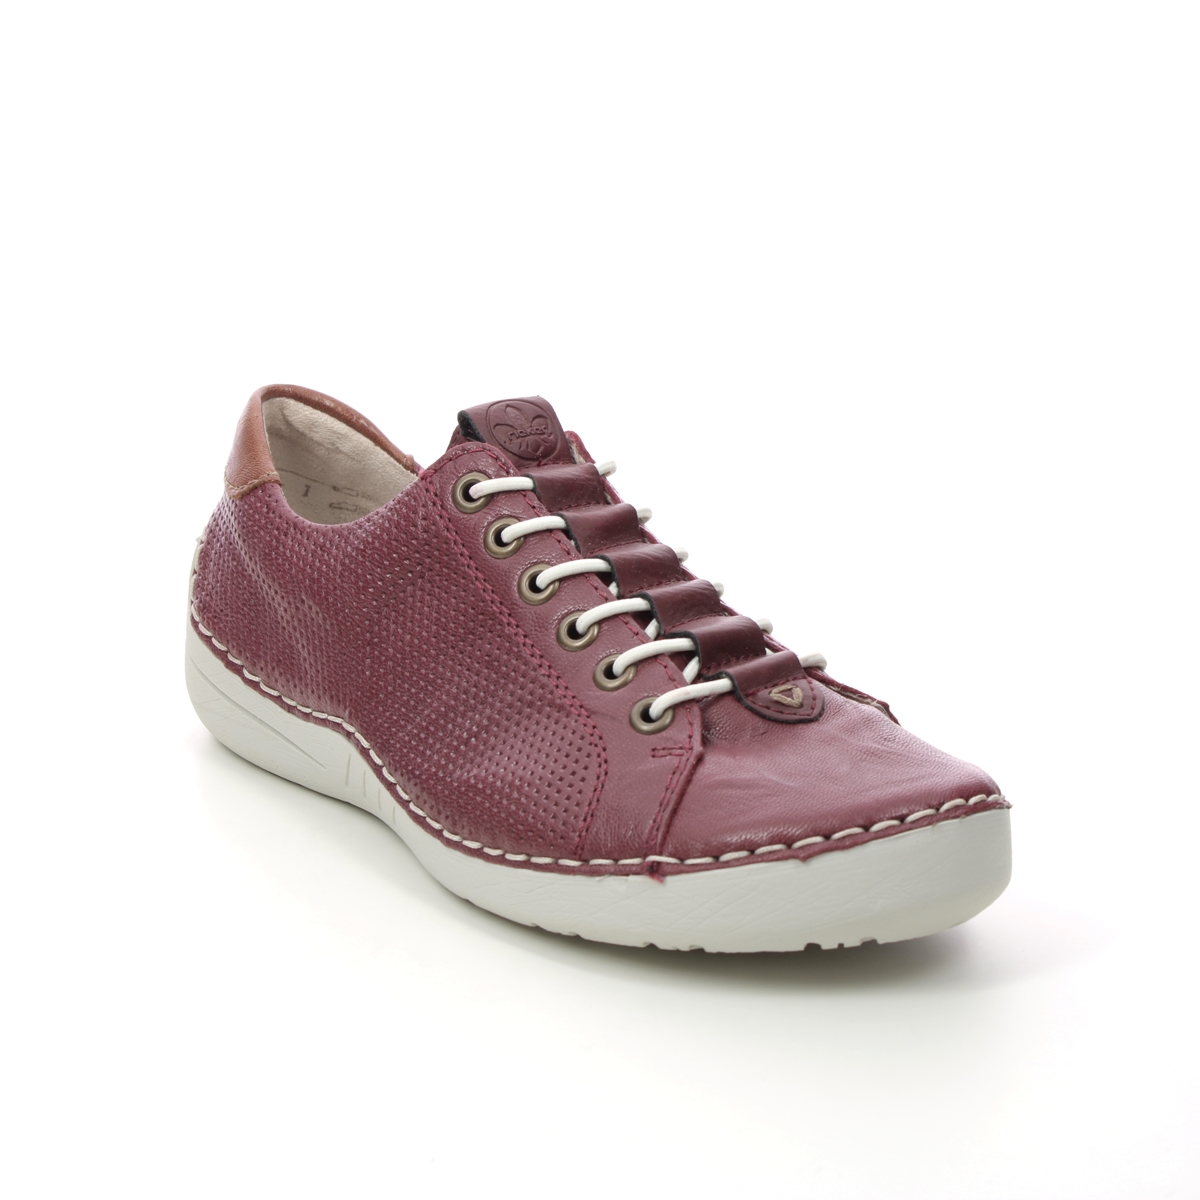 Rieker Funzela Wine Leather Womens Lacing Shoes 52585-35 In Size 39 In Plain Wine Leather